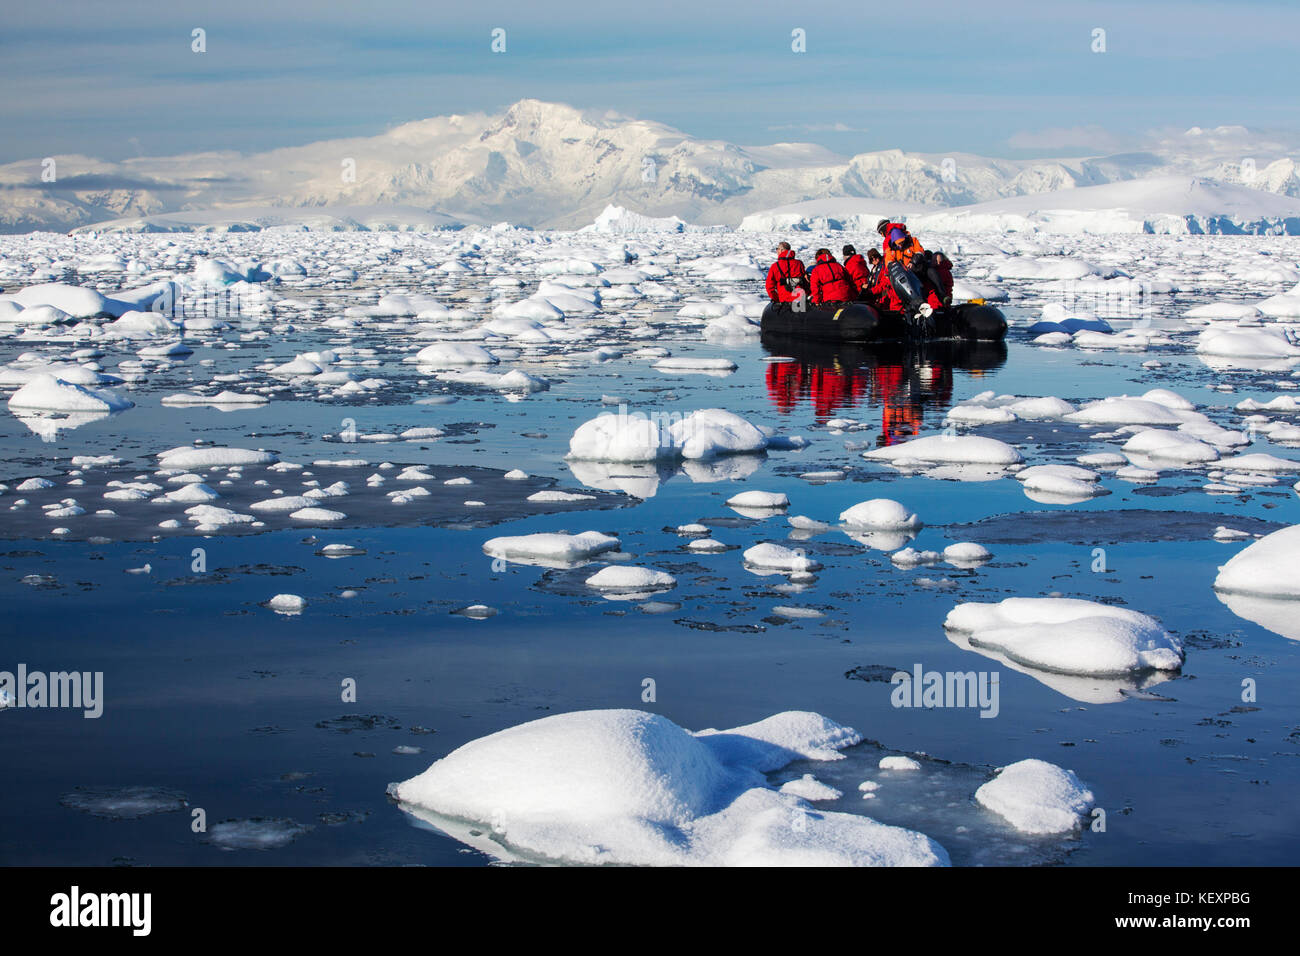 Members of an expedition cruise to Antarctica in a Zodiak in Fournier Bay in the Gerlache Strait on the Antarctic peninsula. The Antarctic peninsula is one of the most rapidly warming areas on the planet. Stock Photo